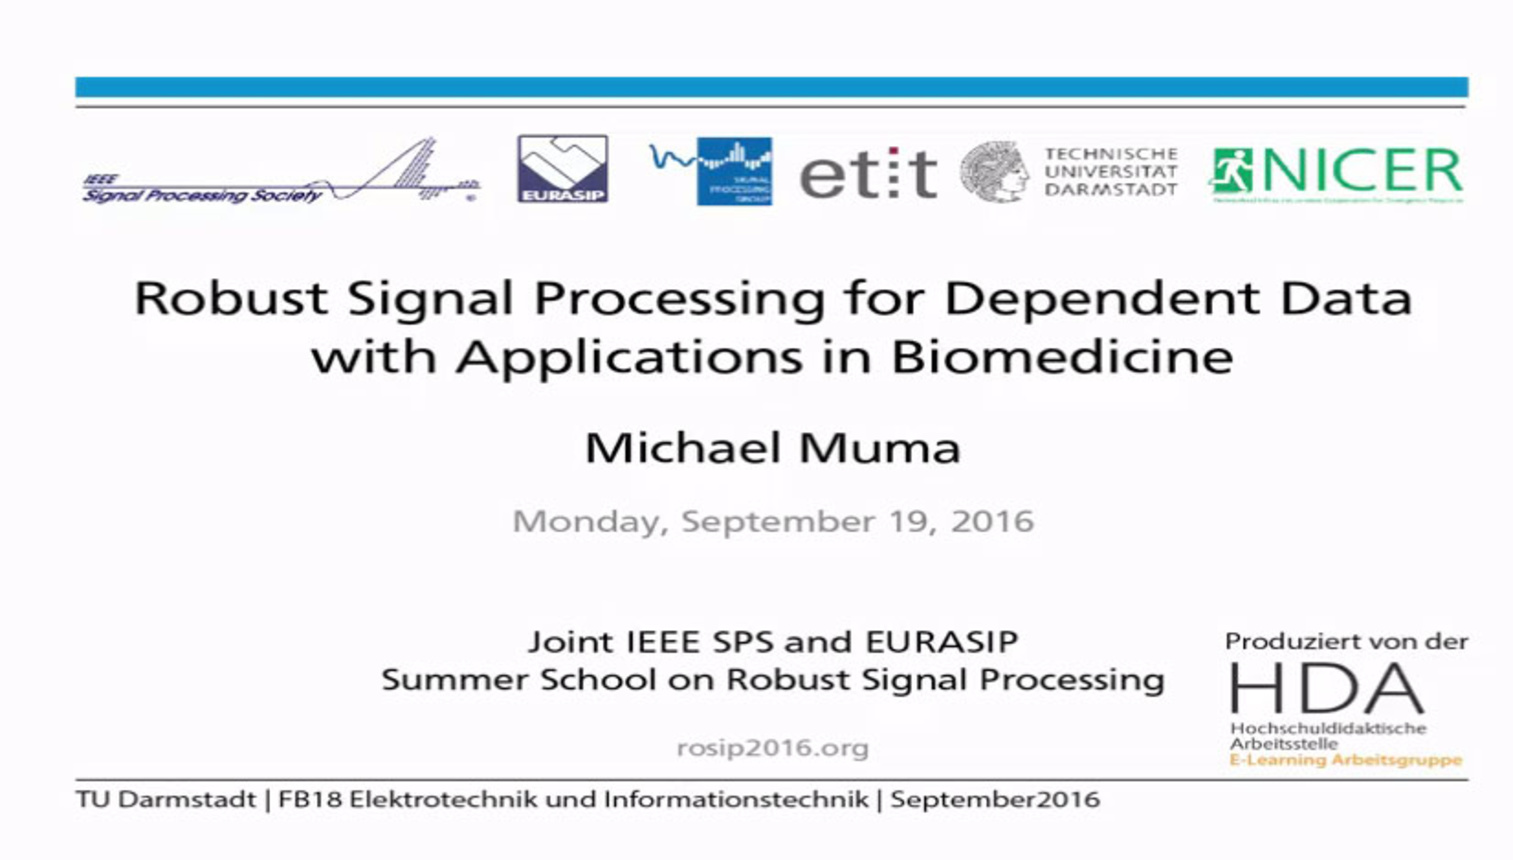 Robust Signal Processing for Dependent Data with Applications in Biomedicine